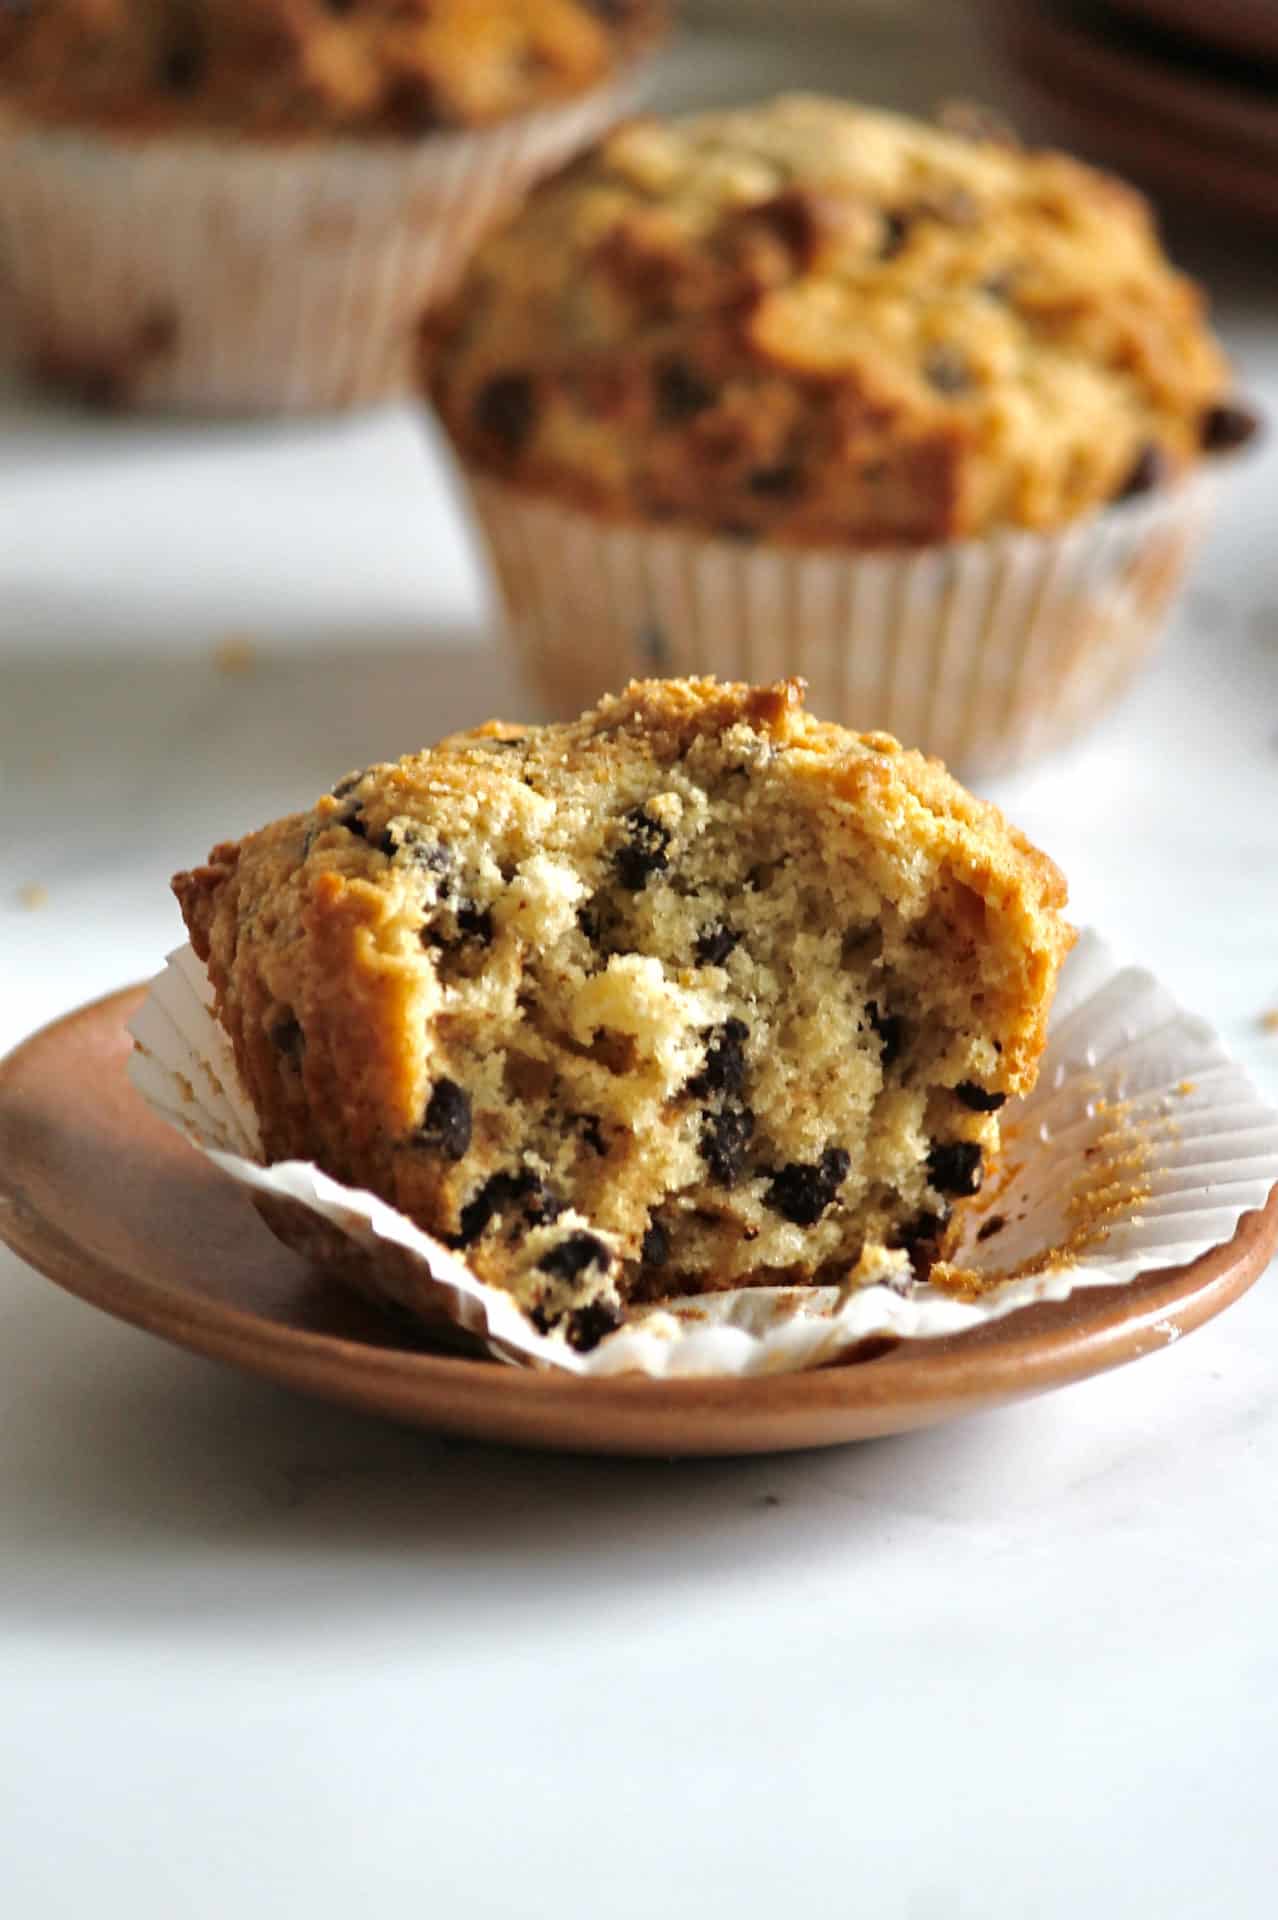 Bakery style chocolate chip muffins with a bite missing from one